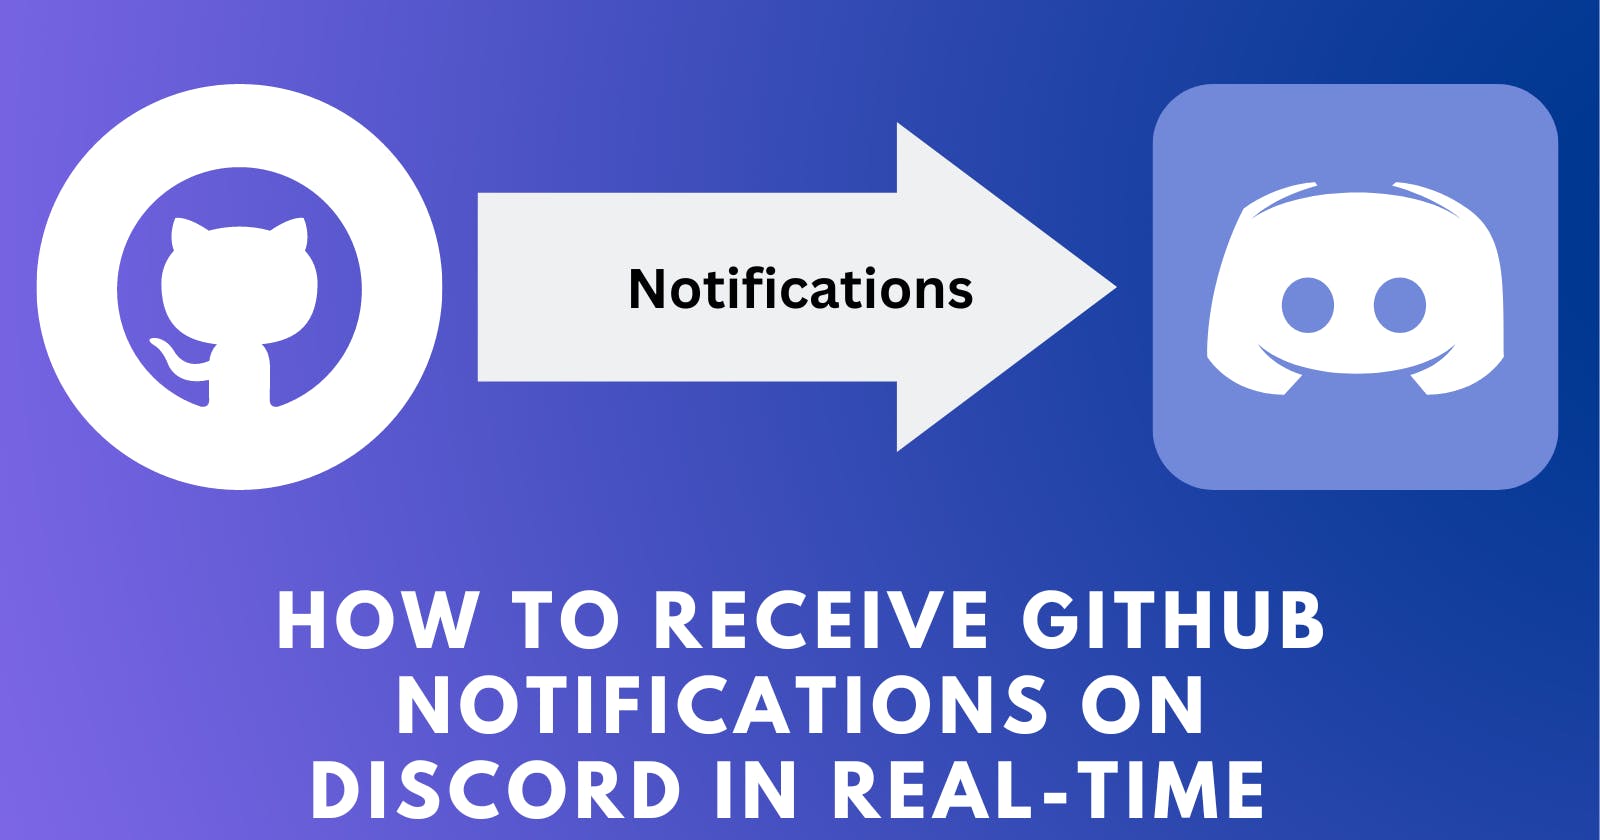 How to Receive GitHub Notifications on Discord in
Real-Time